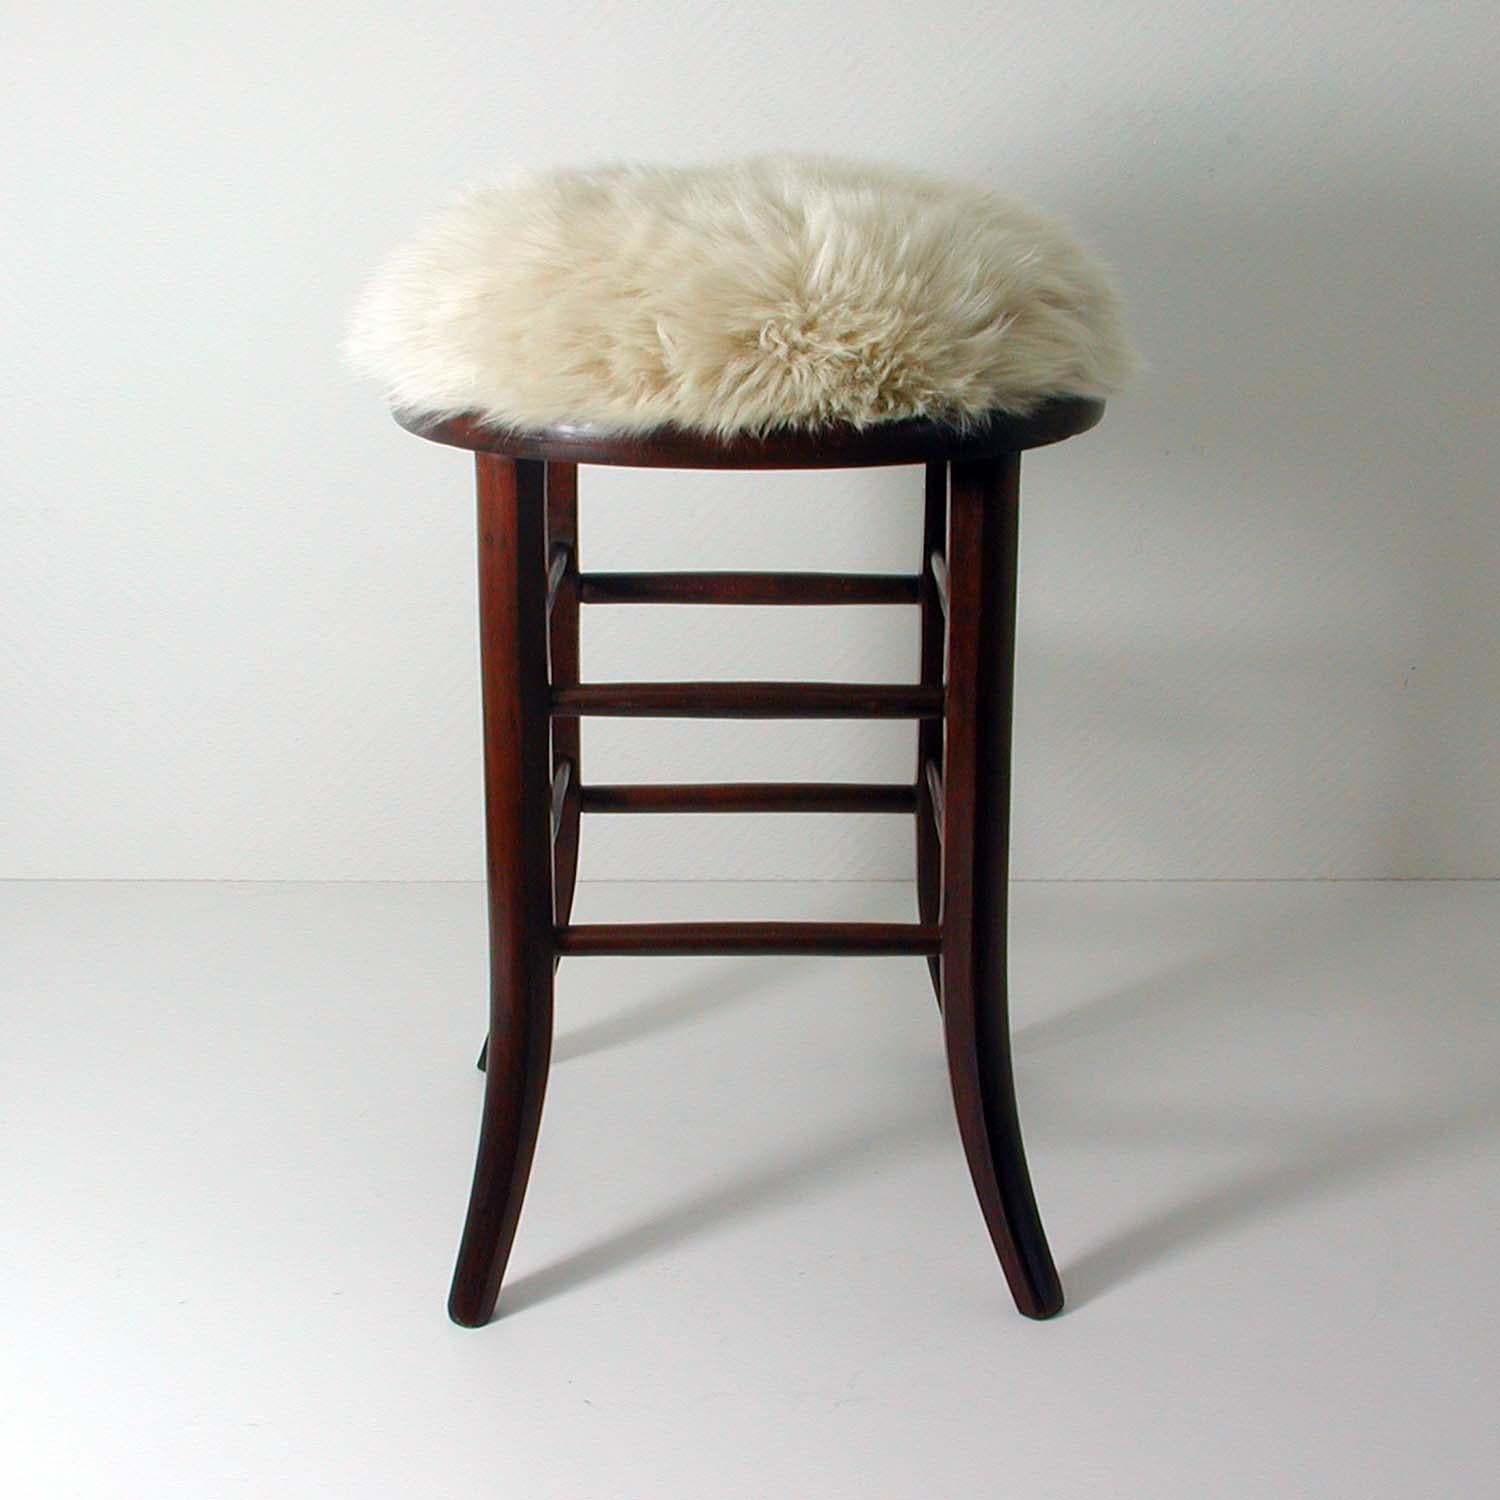 Mid-20th Century Real Iceland Cream Sheep Lamb and Walnut Upholstered Stool Chair, Austria, 1940s